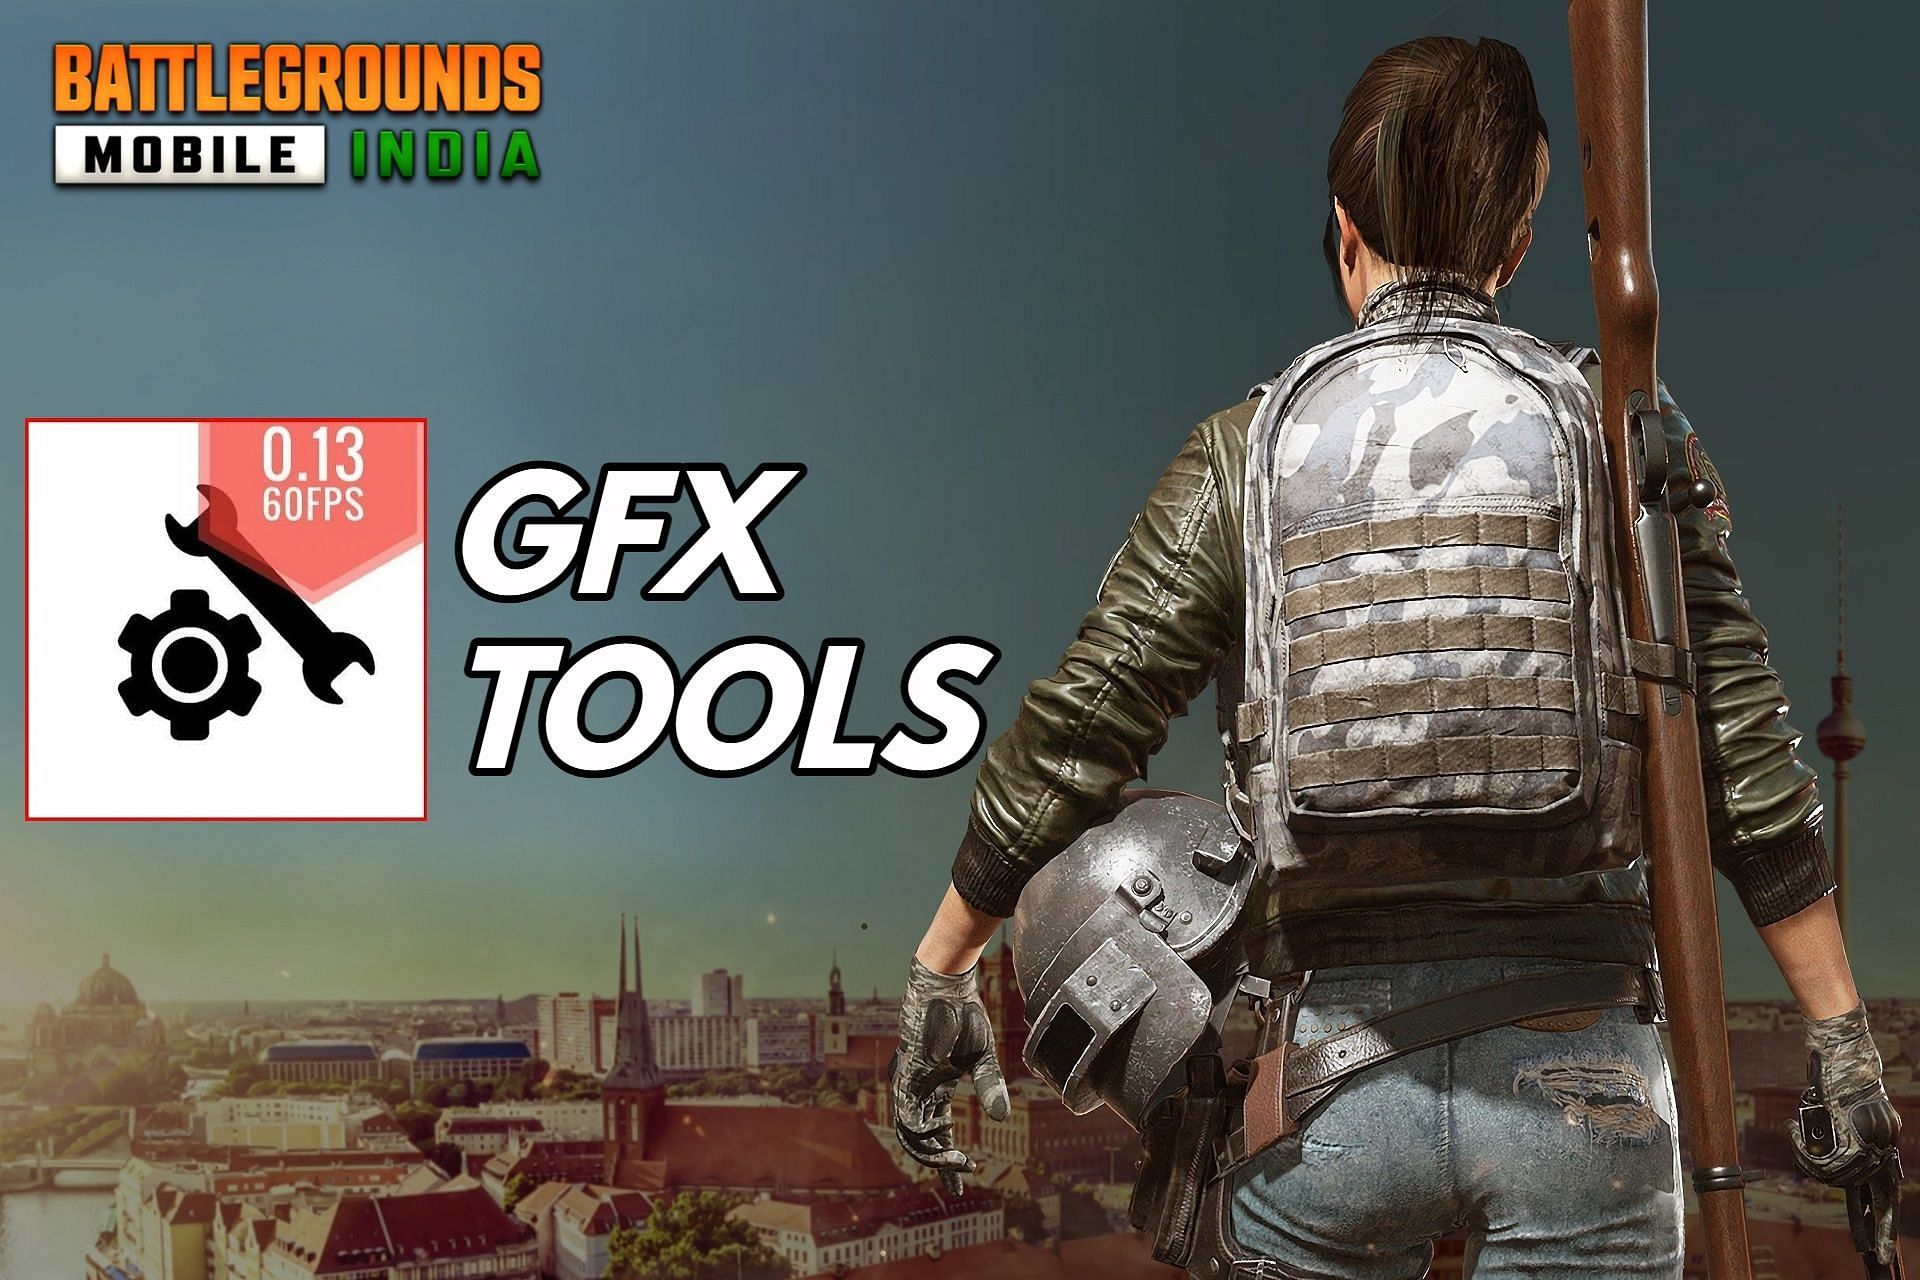 GFX tools are used by players to get smooth gameplay (Image via Sportskeeda)